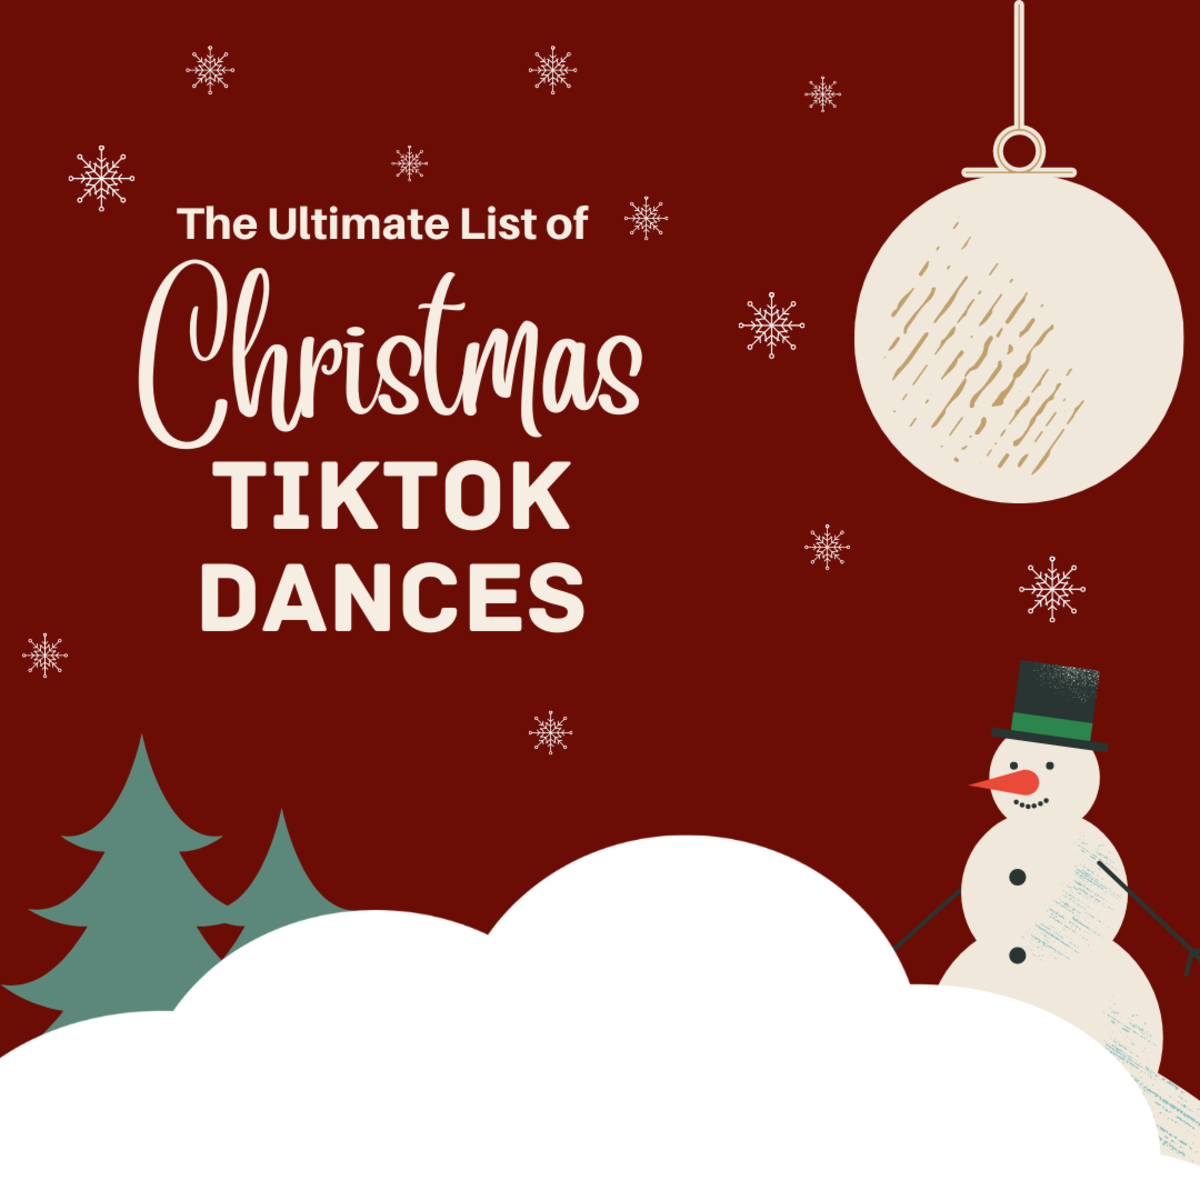 Discover the most popular Christmas TikTok dances in this ultimate list!